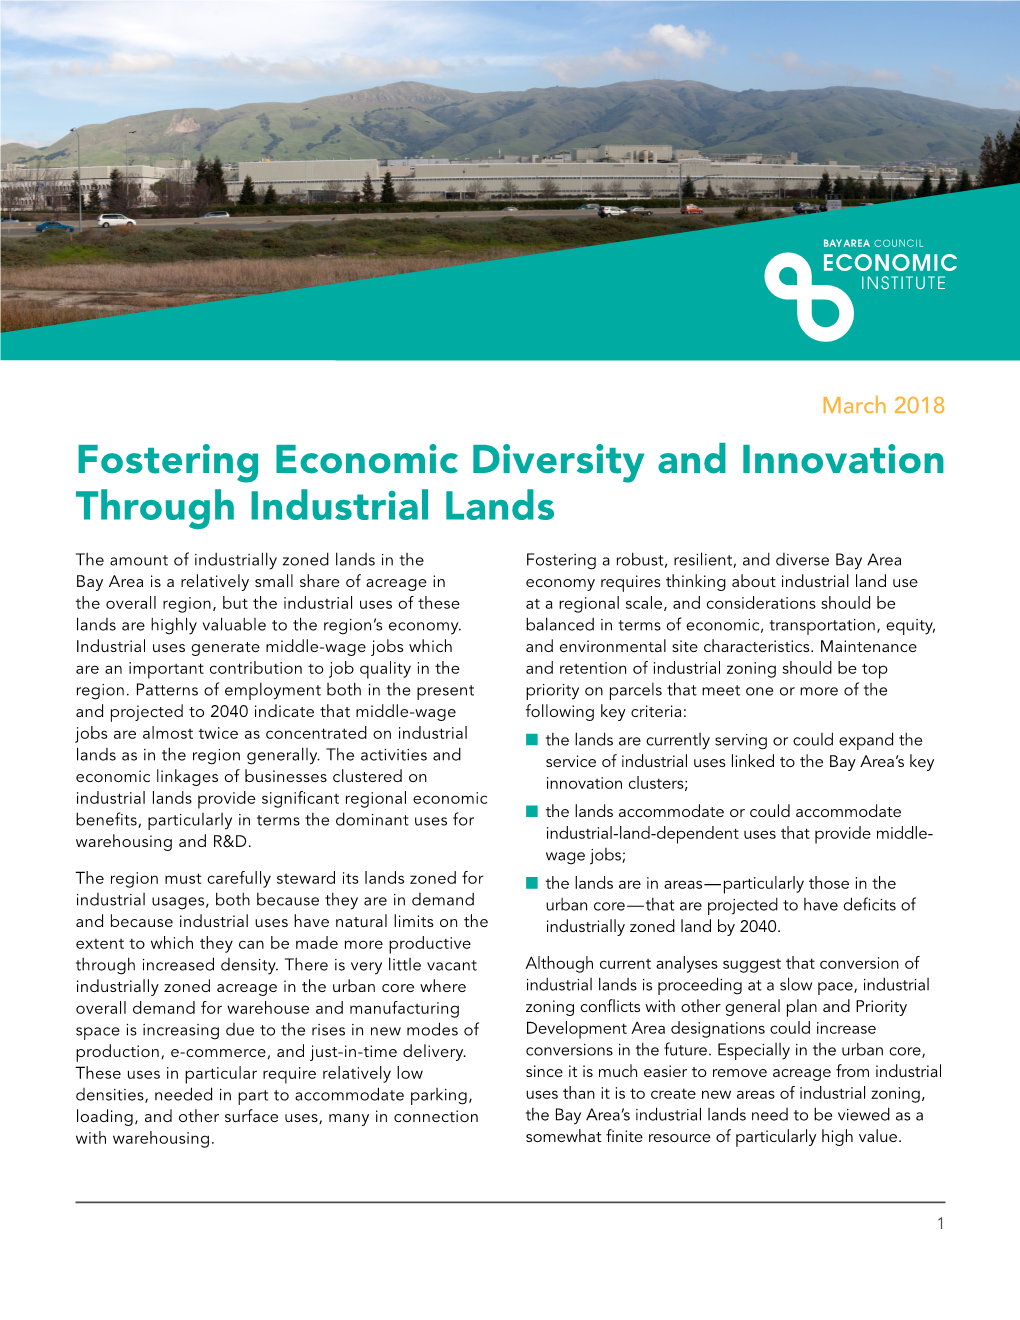 Fostering Economic Diversity and Innovation Through Industrial Lands